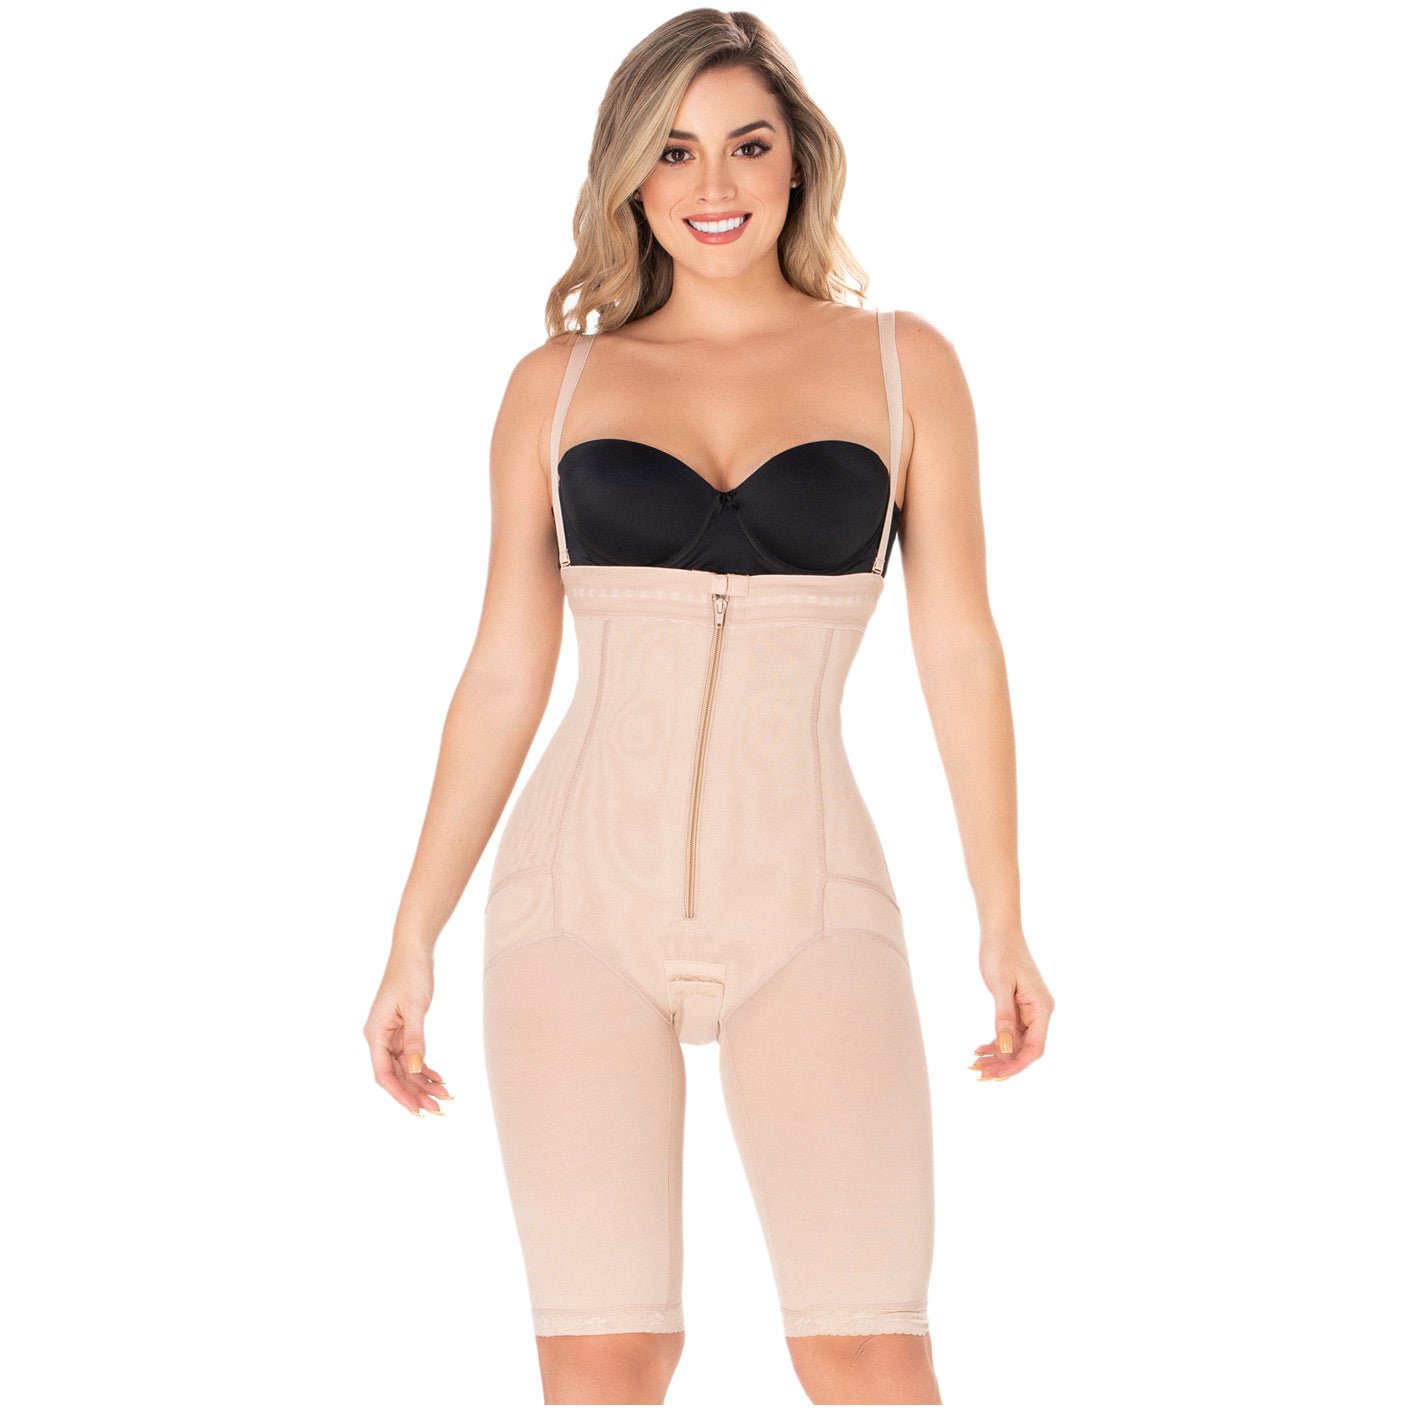 Colombian Latex Body Shaper With Reductoras Levanta Cola Post Parto Girdle,  Slimming Underbust Postpartum Corset, And BuLifter1 From Bassabet2021,  $14.41